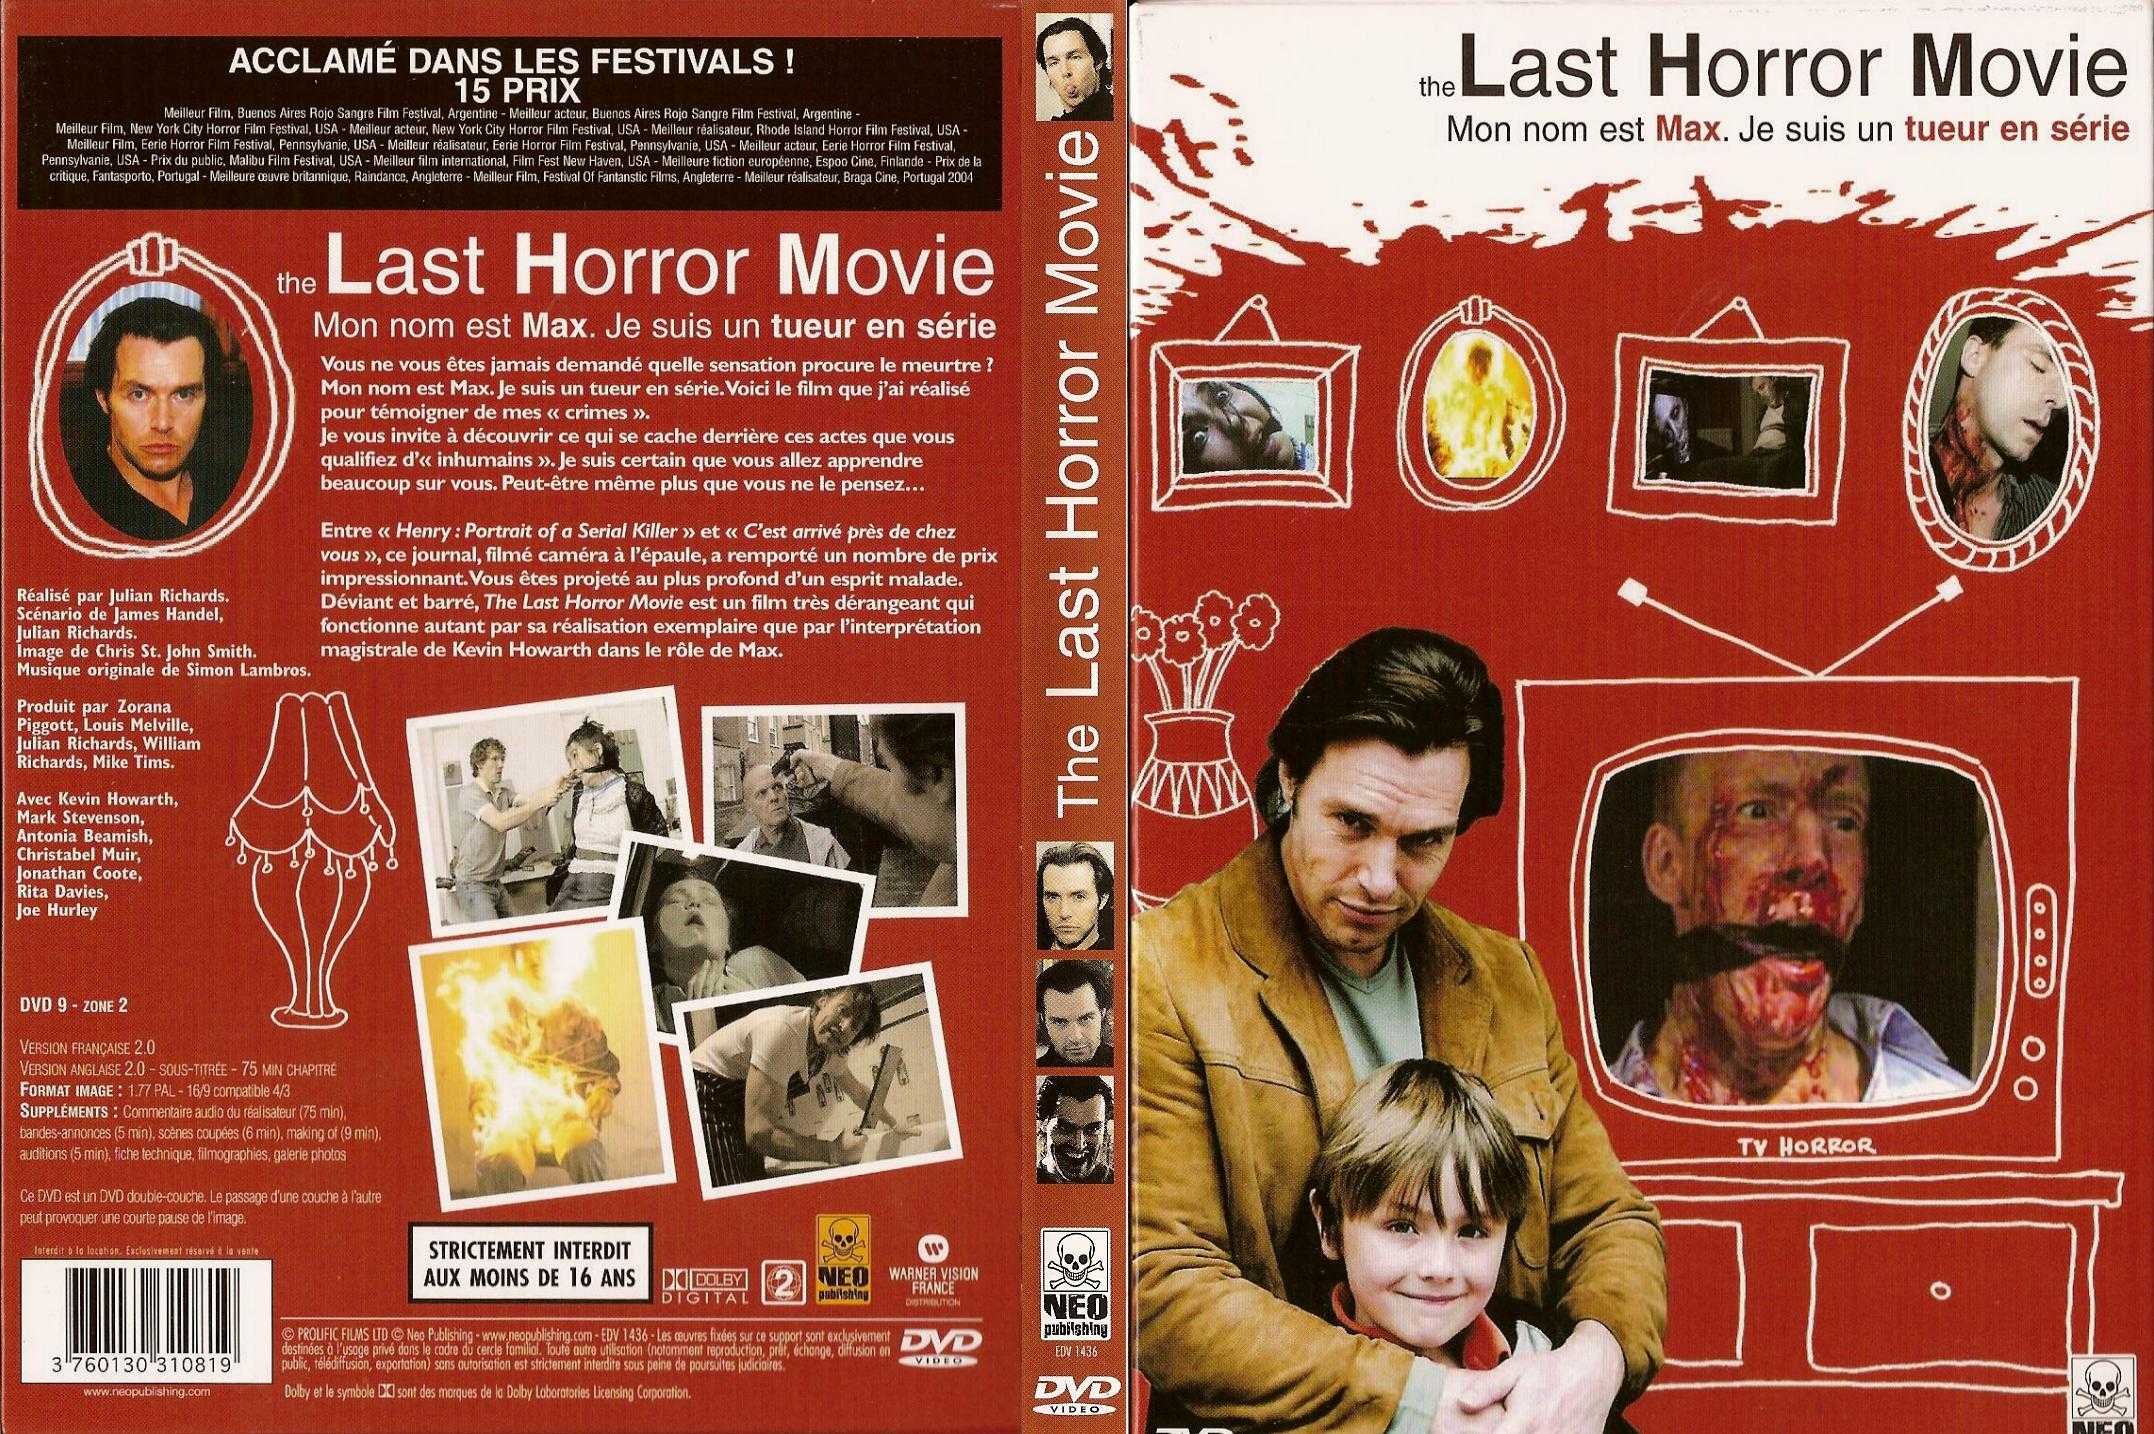 Jaquette DVD The last horror movie